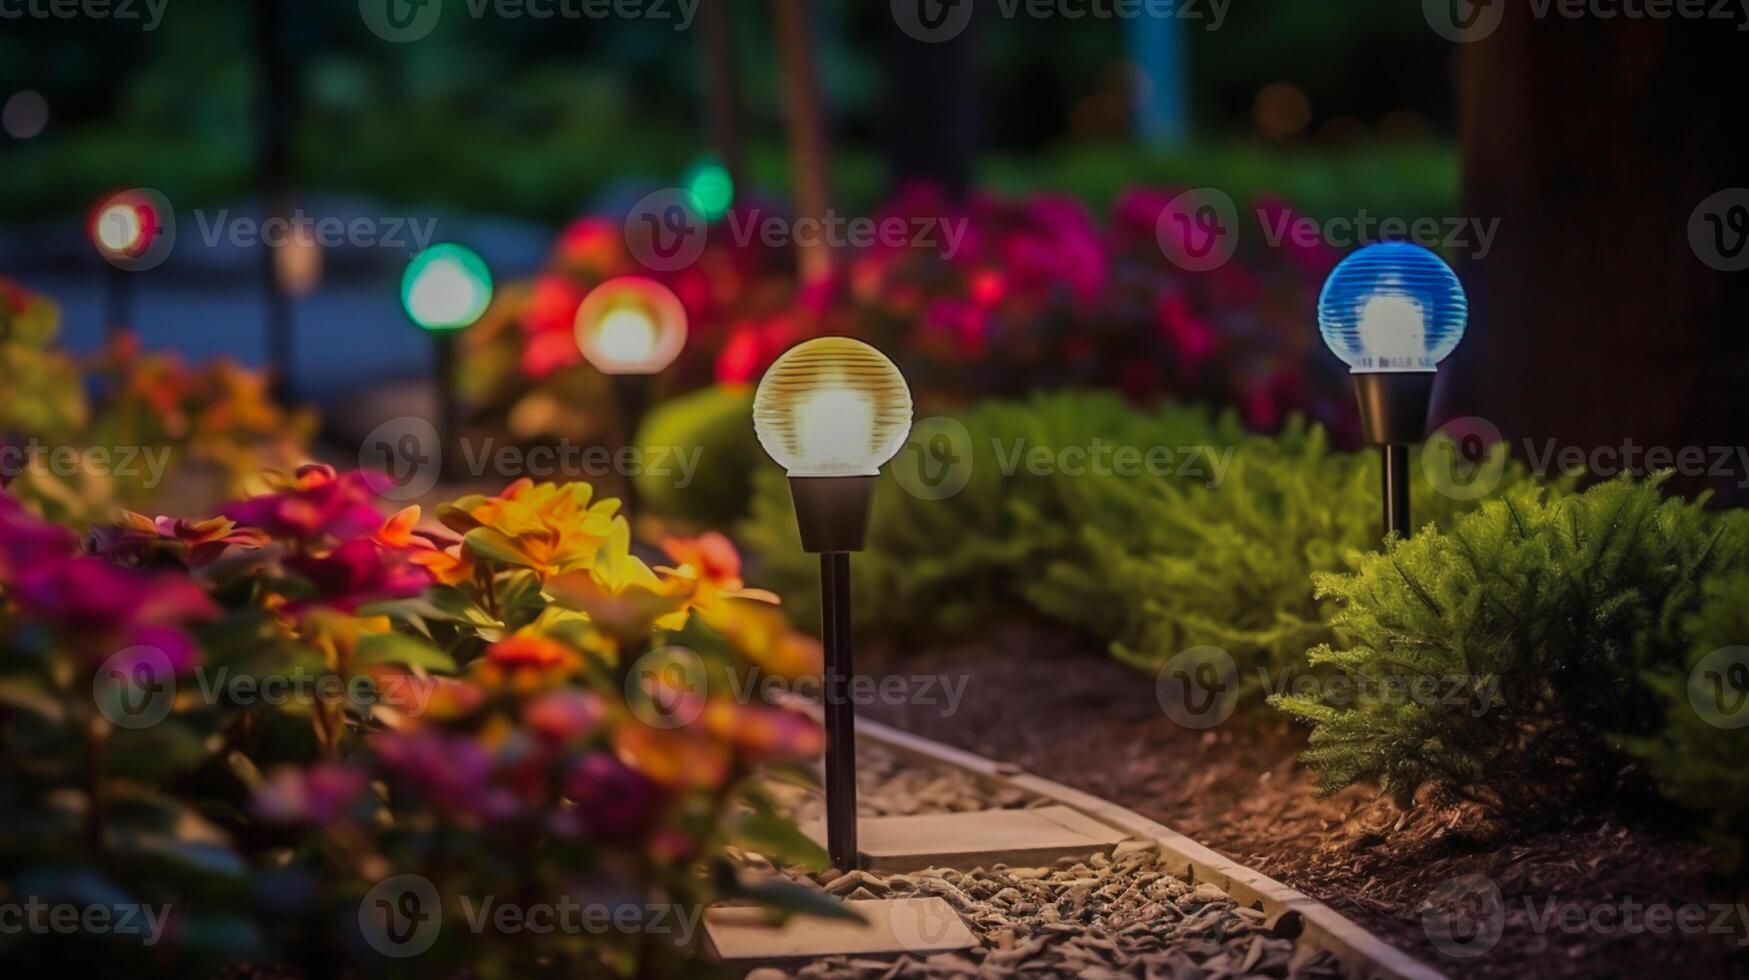 Outdoor Lanterns For Garden Design And Decoration Among Flowers photo